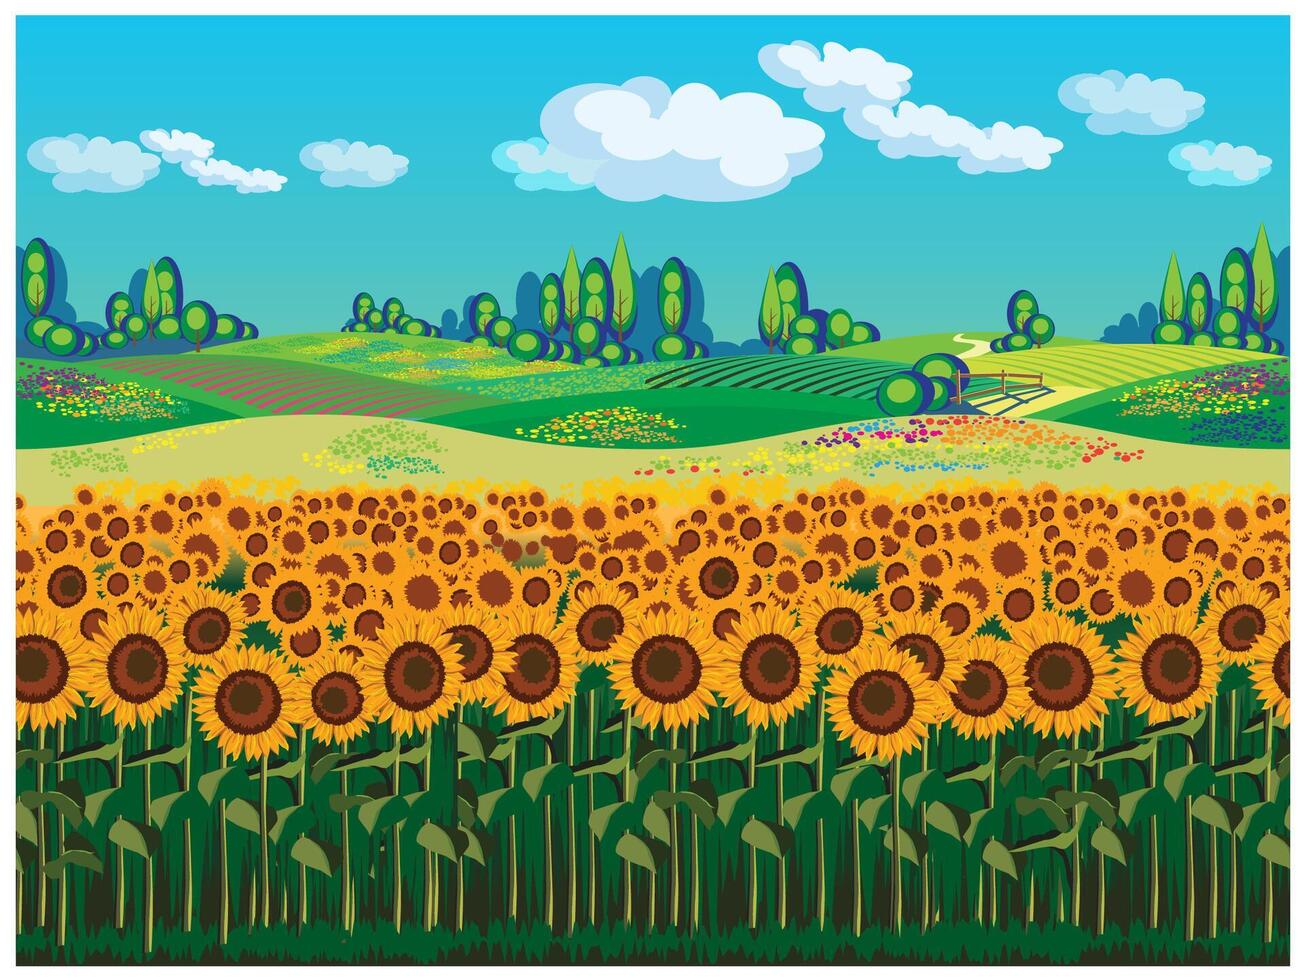 Scenic landscape with sunflowers vector